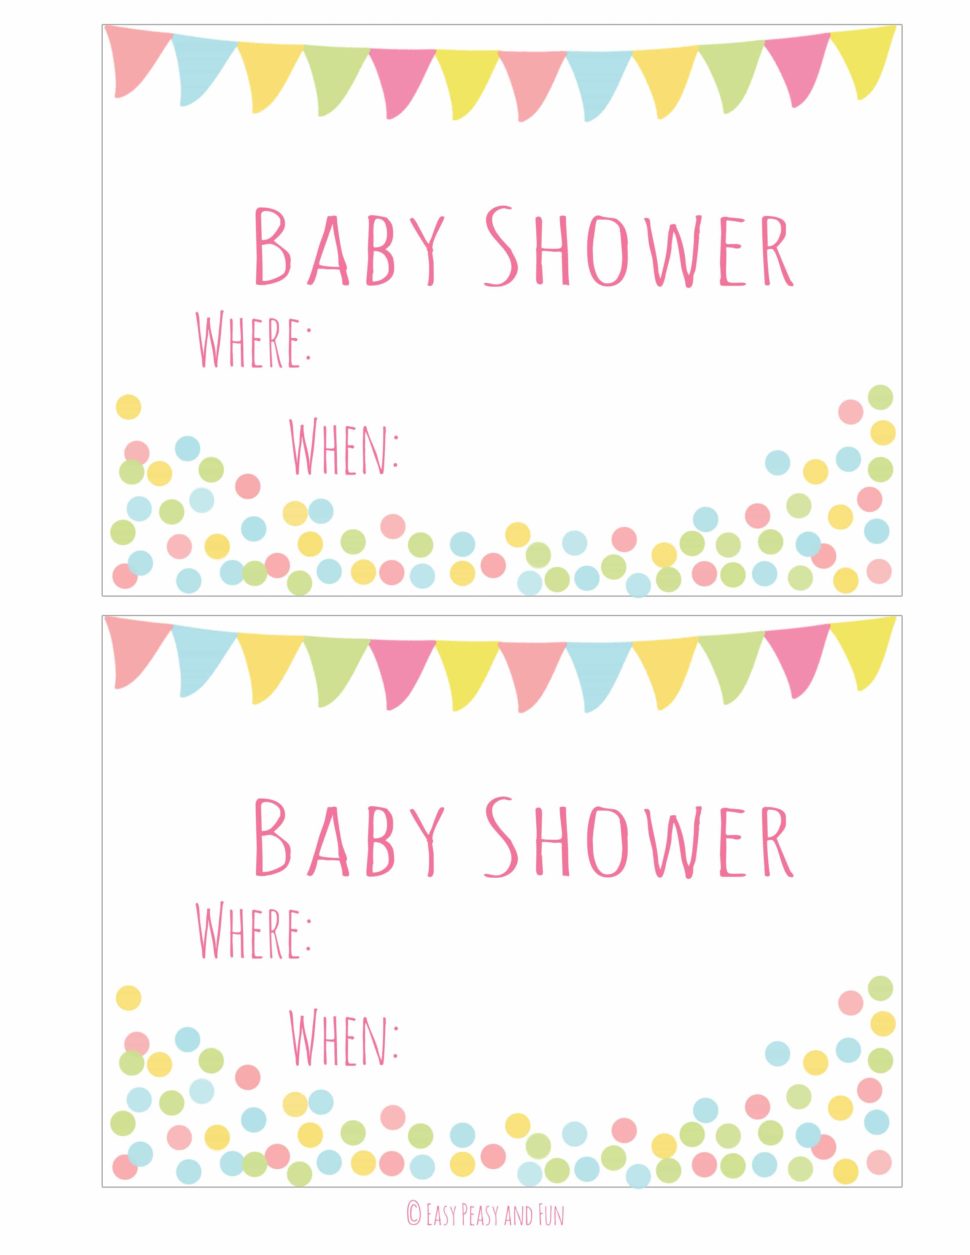 Medium Size of Baby Shower:nautical Baby Shower Invitations For Boys Baby Girl Themes For Bedroom Baby Shower Ideas Baby Shower Decorations Themes For Baby Girl Nursery Cheap Invitations Baby Shower Homemade Baby Shower Decorations Baby Shower Centerpiece Ideas For Boys Homemade Baby Shower Centerpieces